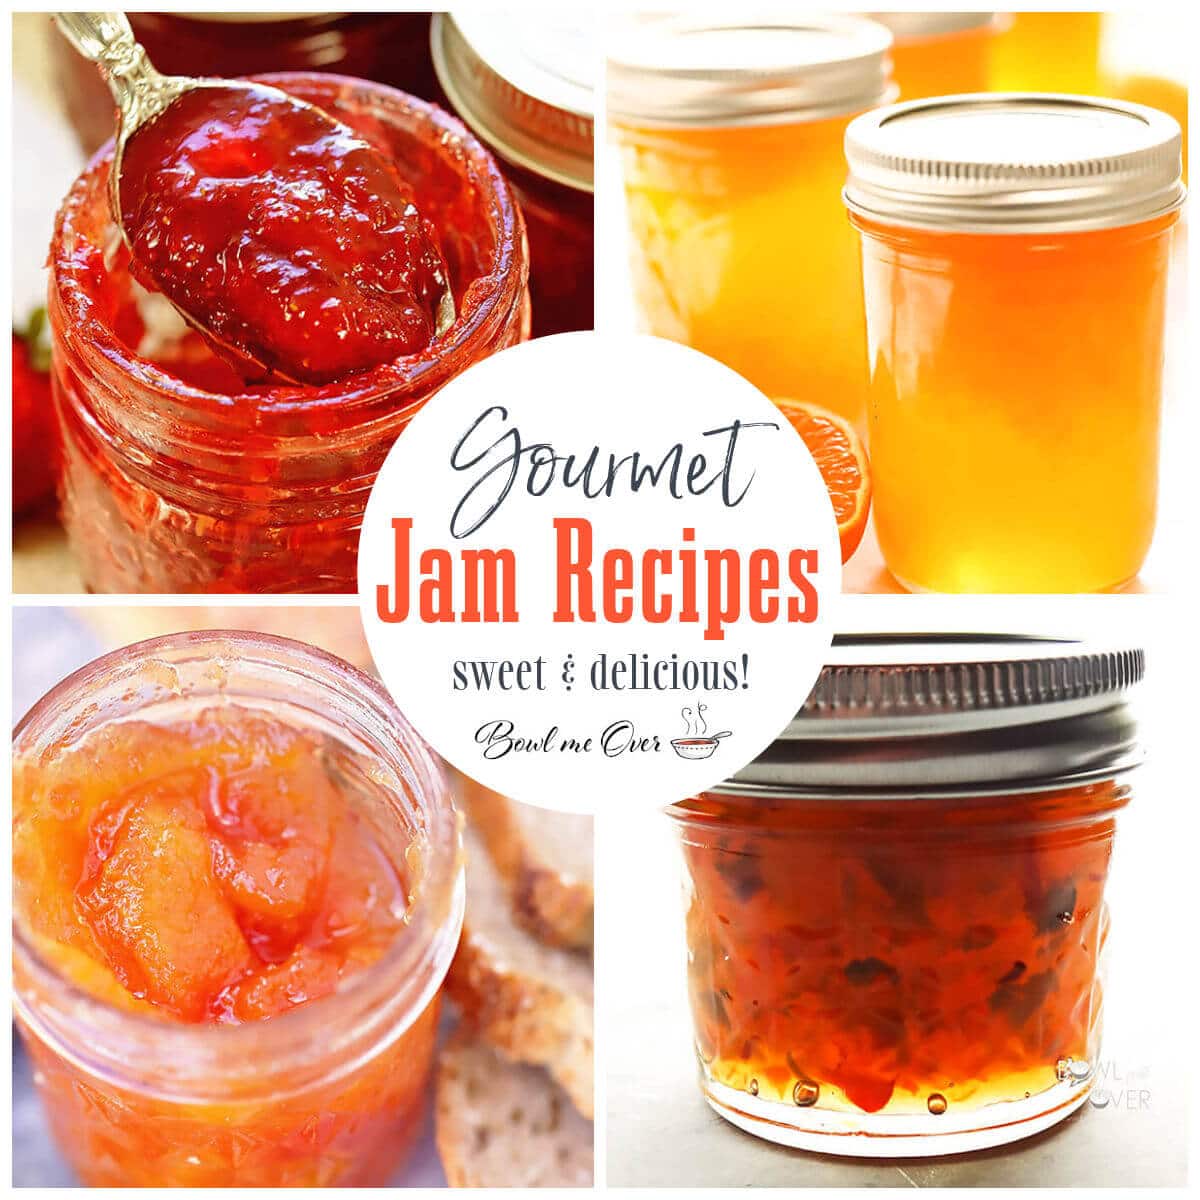 Collage of photos of Gourmet Jam Recipes, with print overlay.